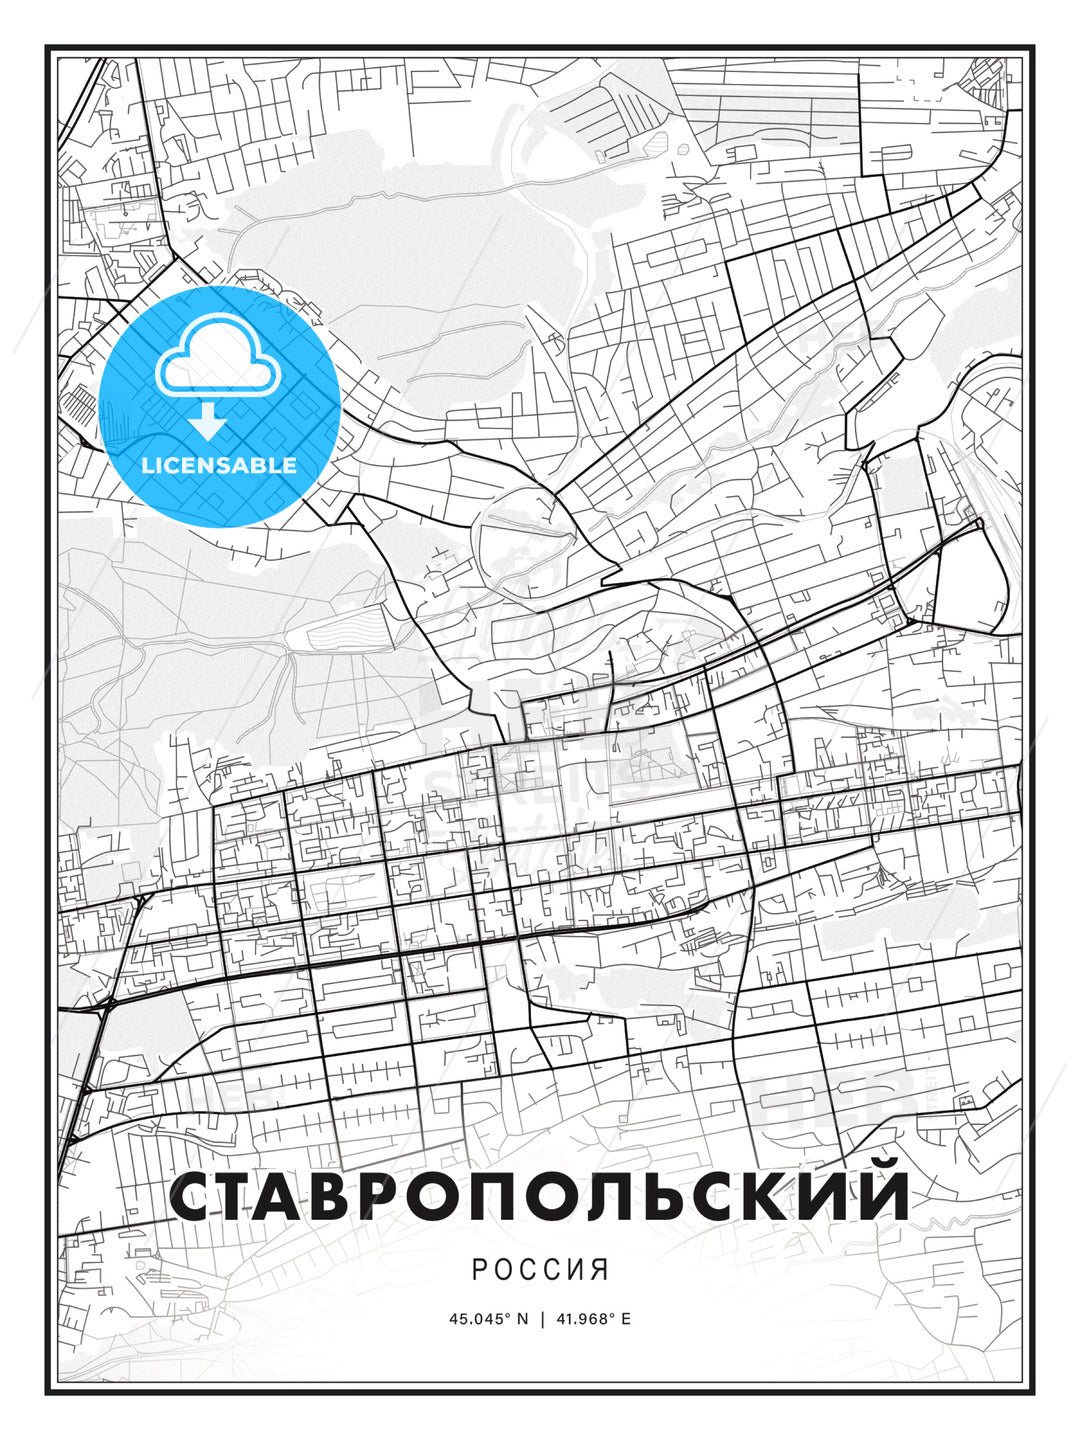 СТАВРОПОЛЬСКИЙ / Stavropol, Russia, Modern Print Template in Various Formats - HEBSTREITS Sketches